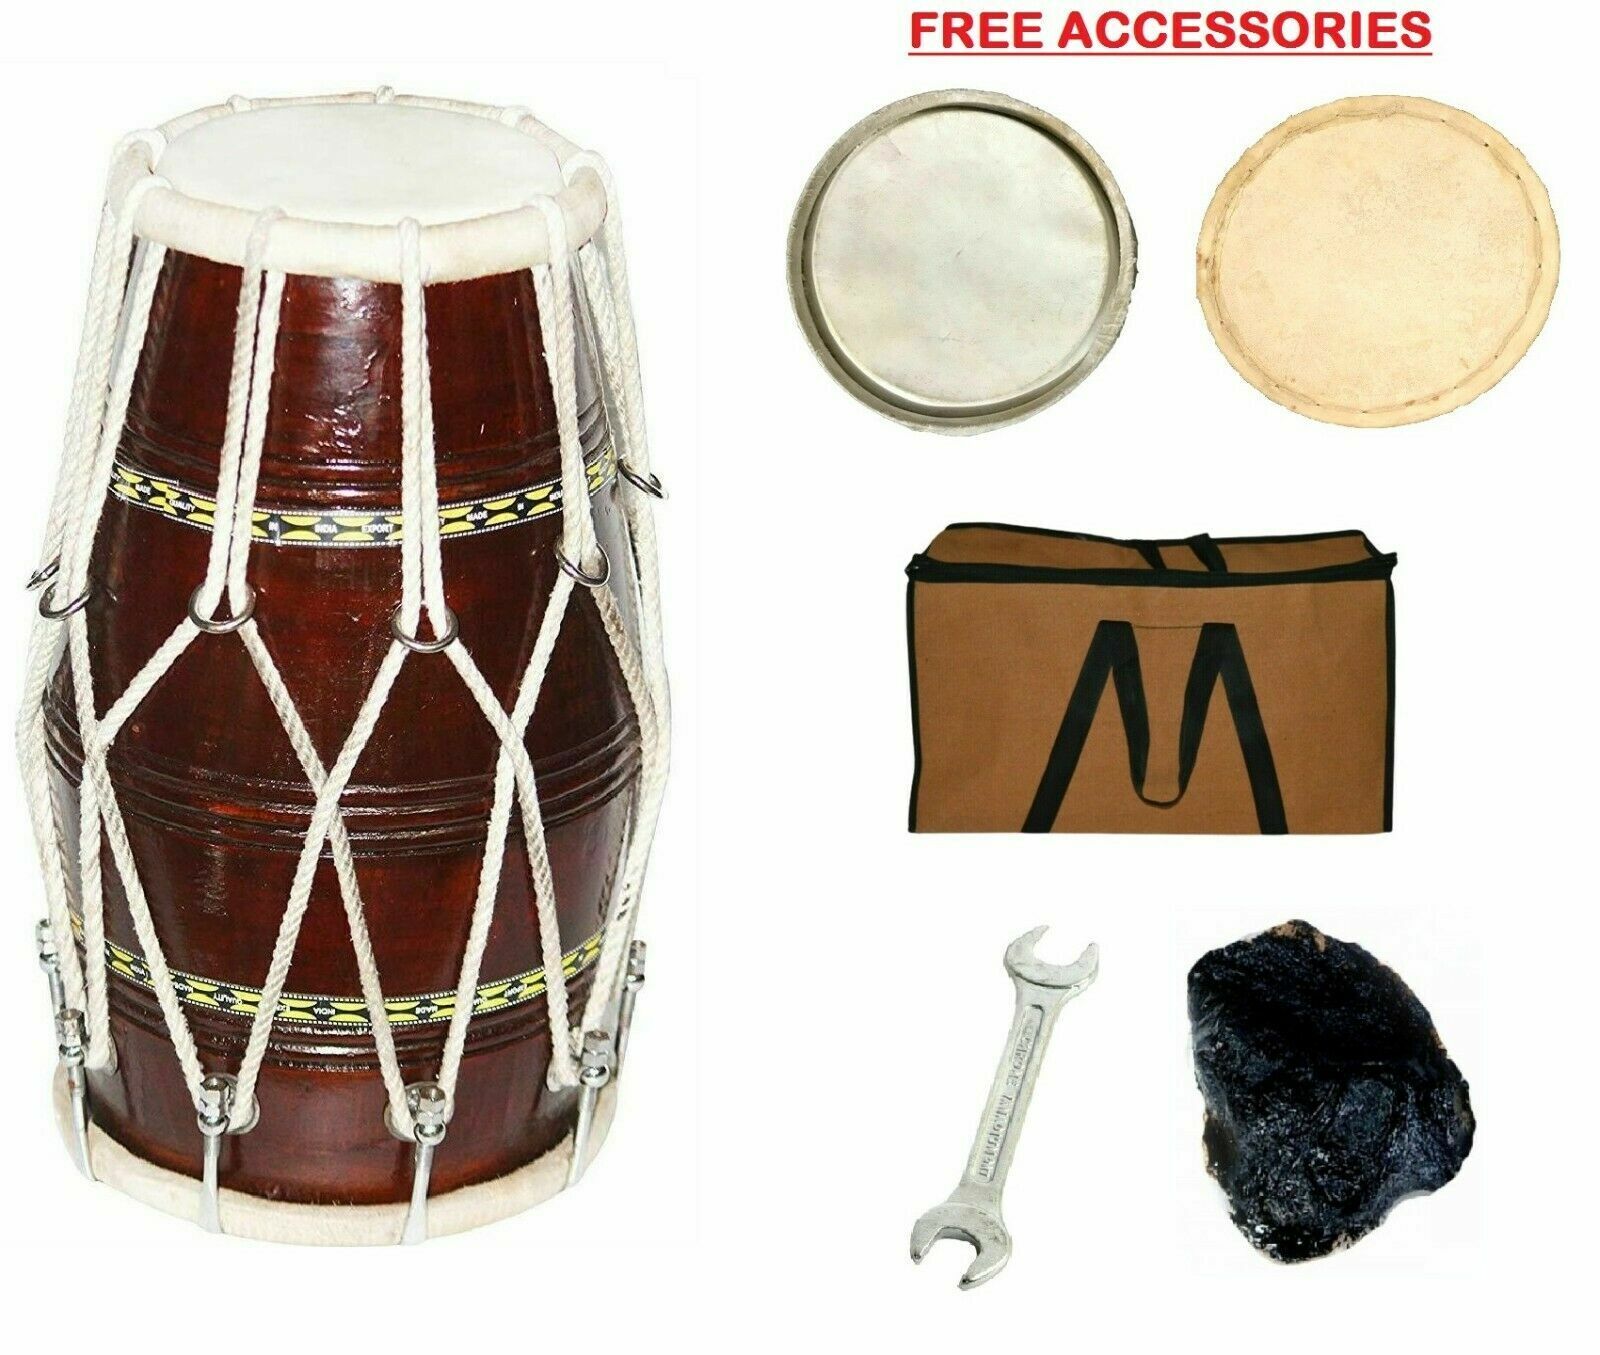 Musical Rope Dholak Mango Wood Indian Traditional Musical Instrument With Cover